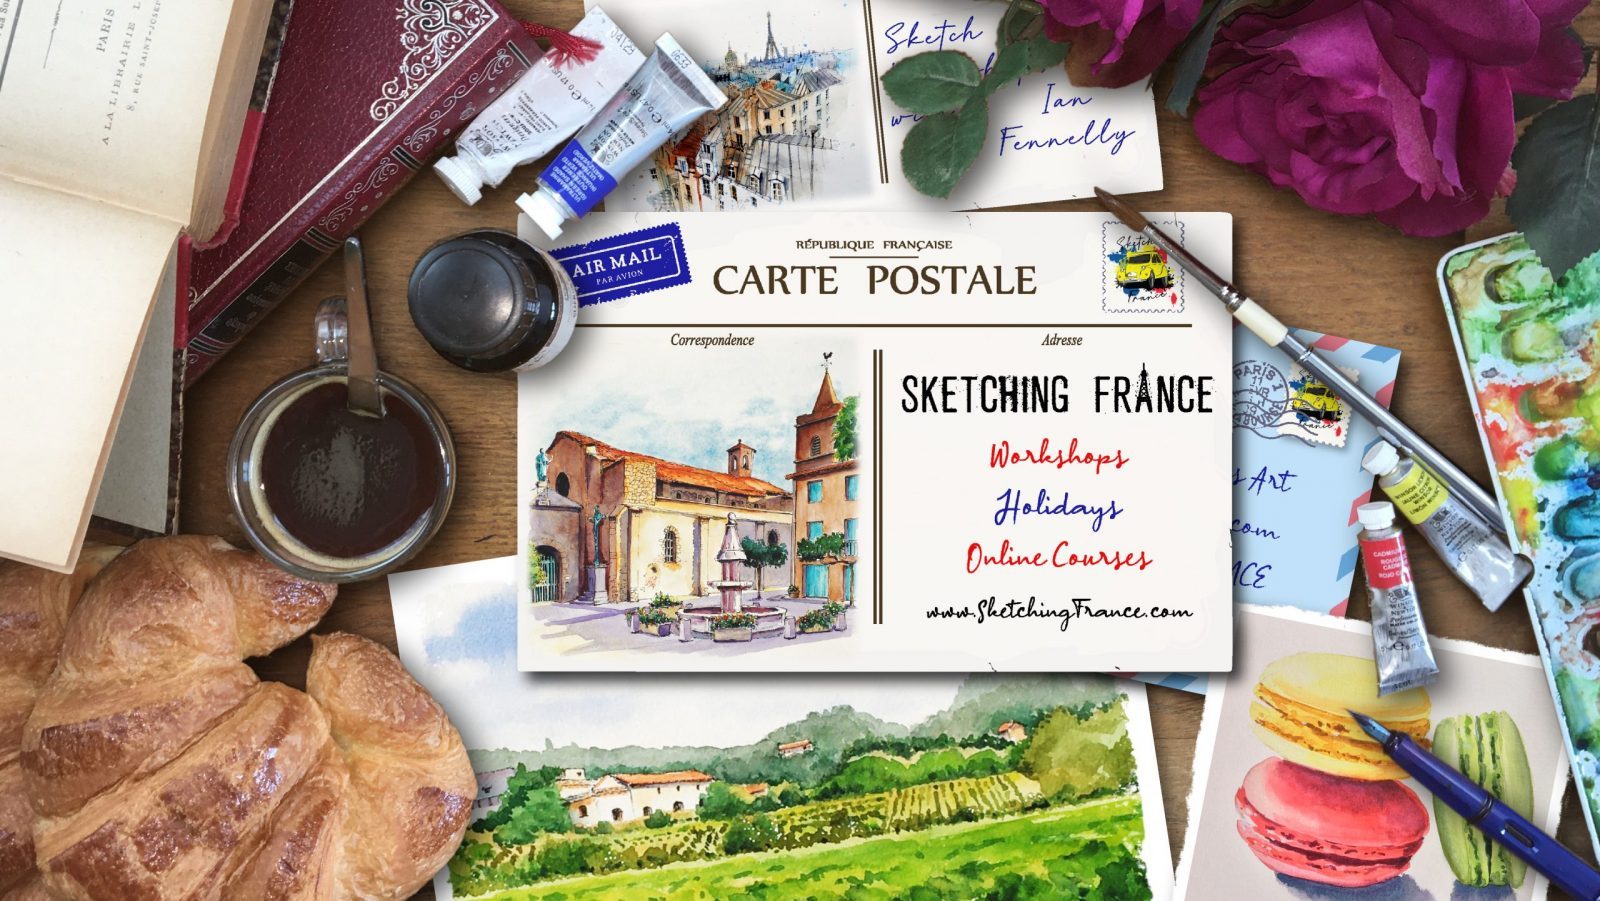 Sketching France! | Workshops, holidays and online courses to develop your sketching and watercolour skills whilst learning more about French life and culture.